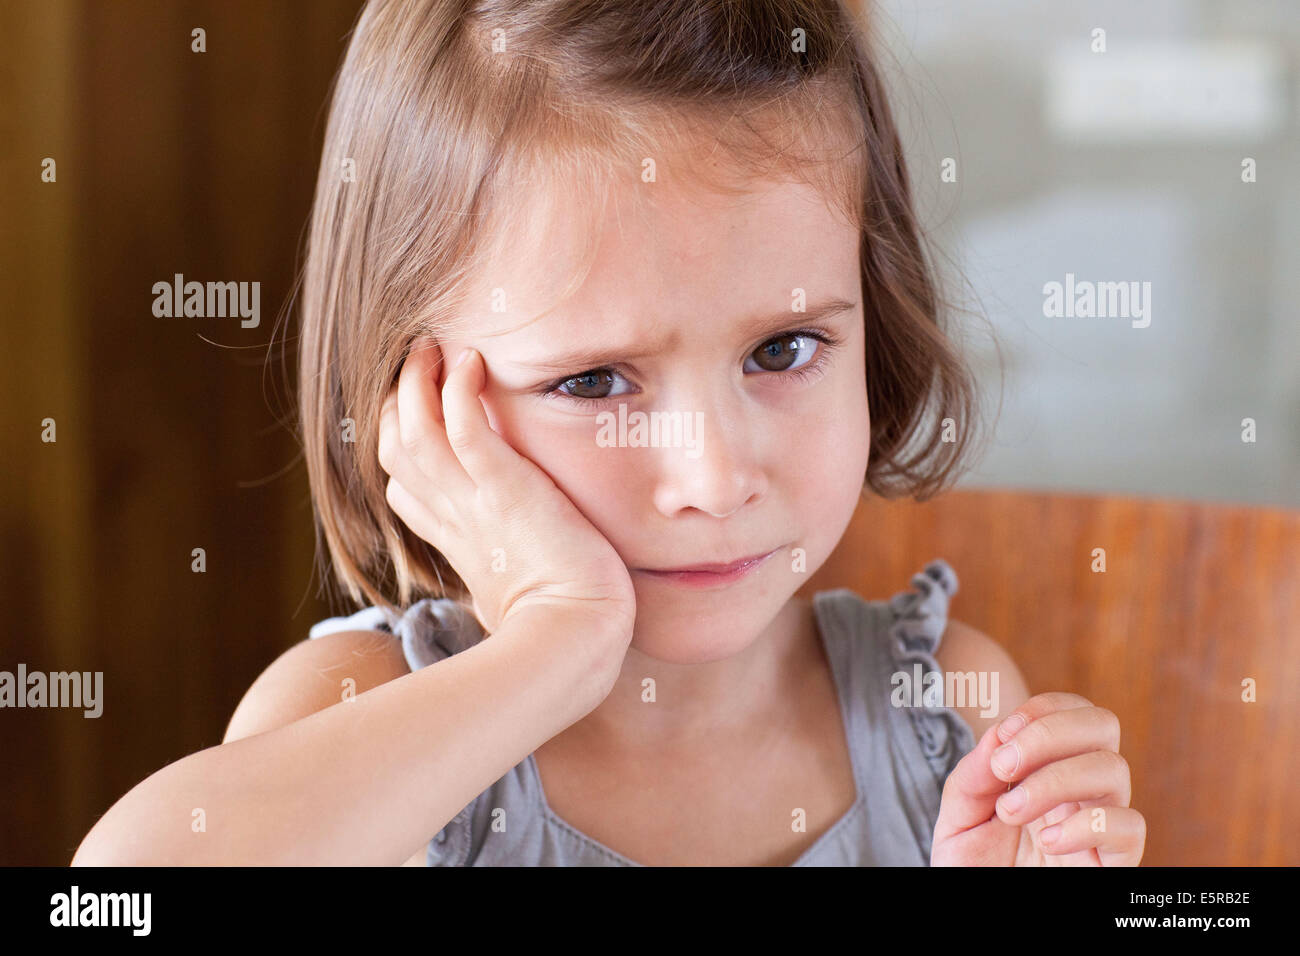 4-year-old girl. Banque D'Images